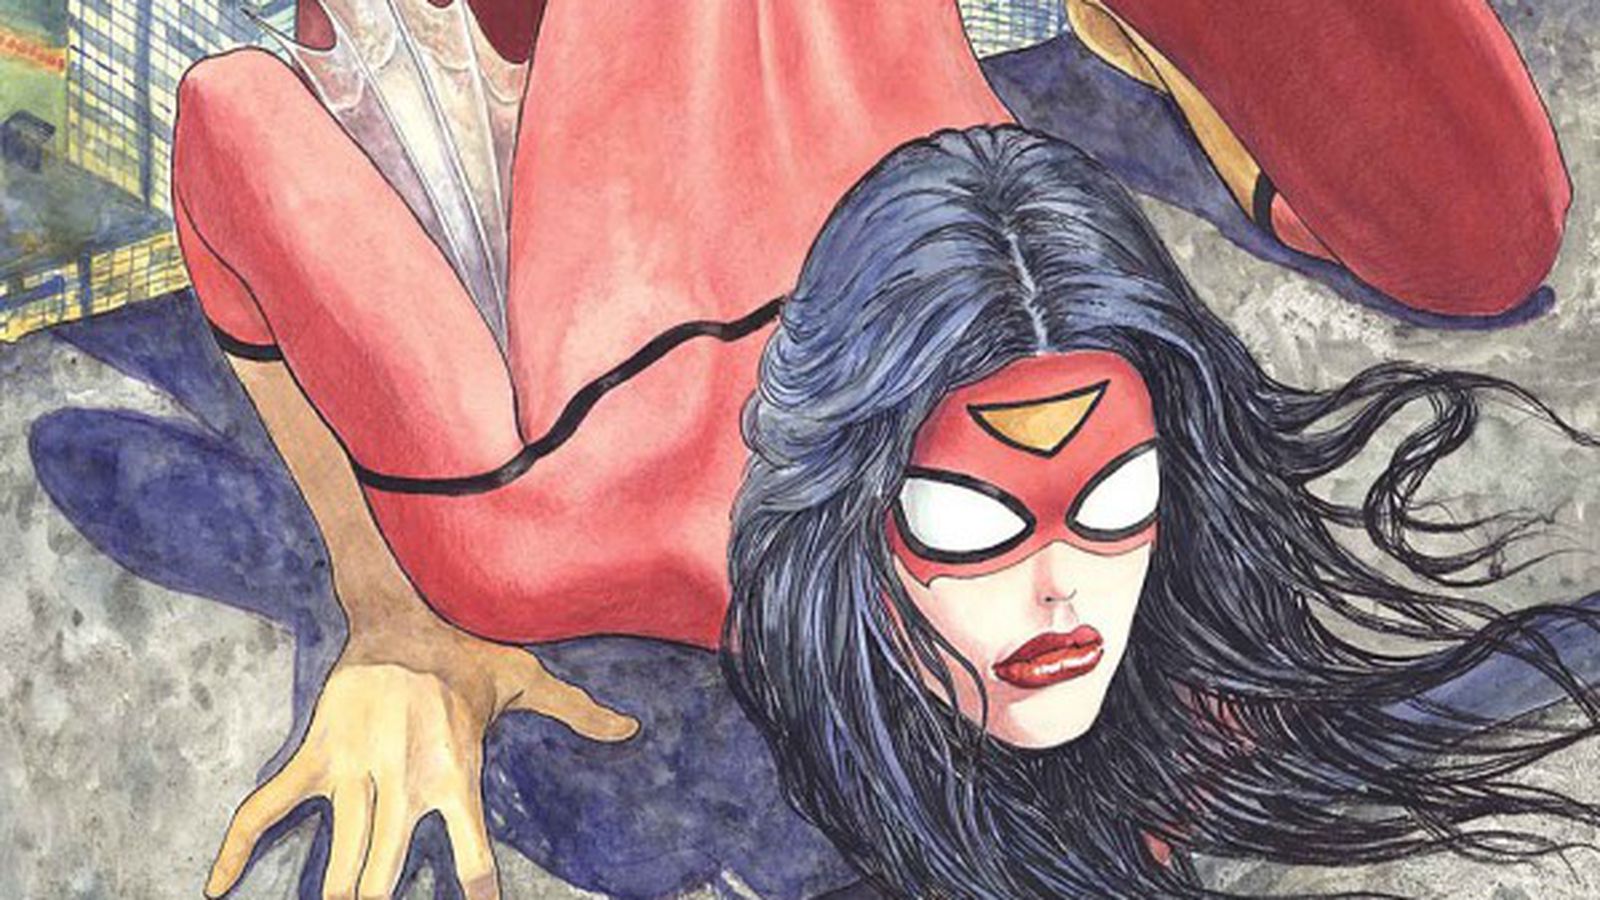 Marvel's Spider-Woman cover controversy, explained.